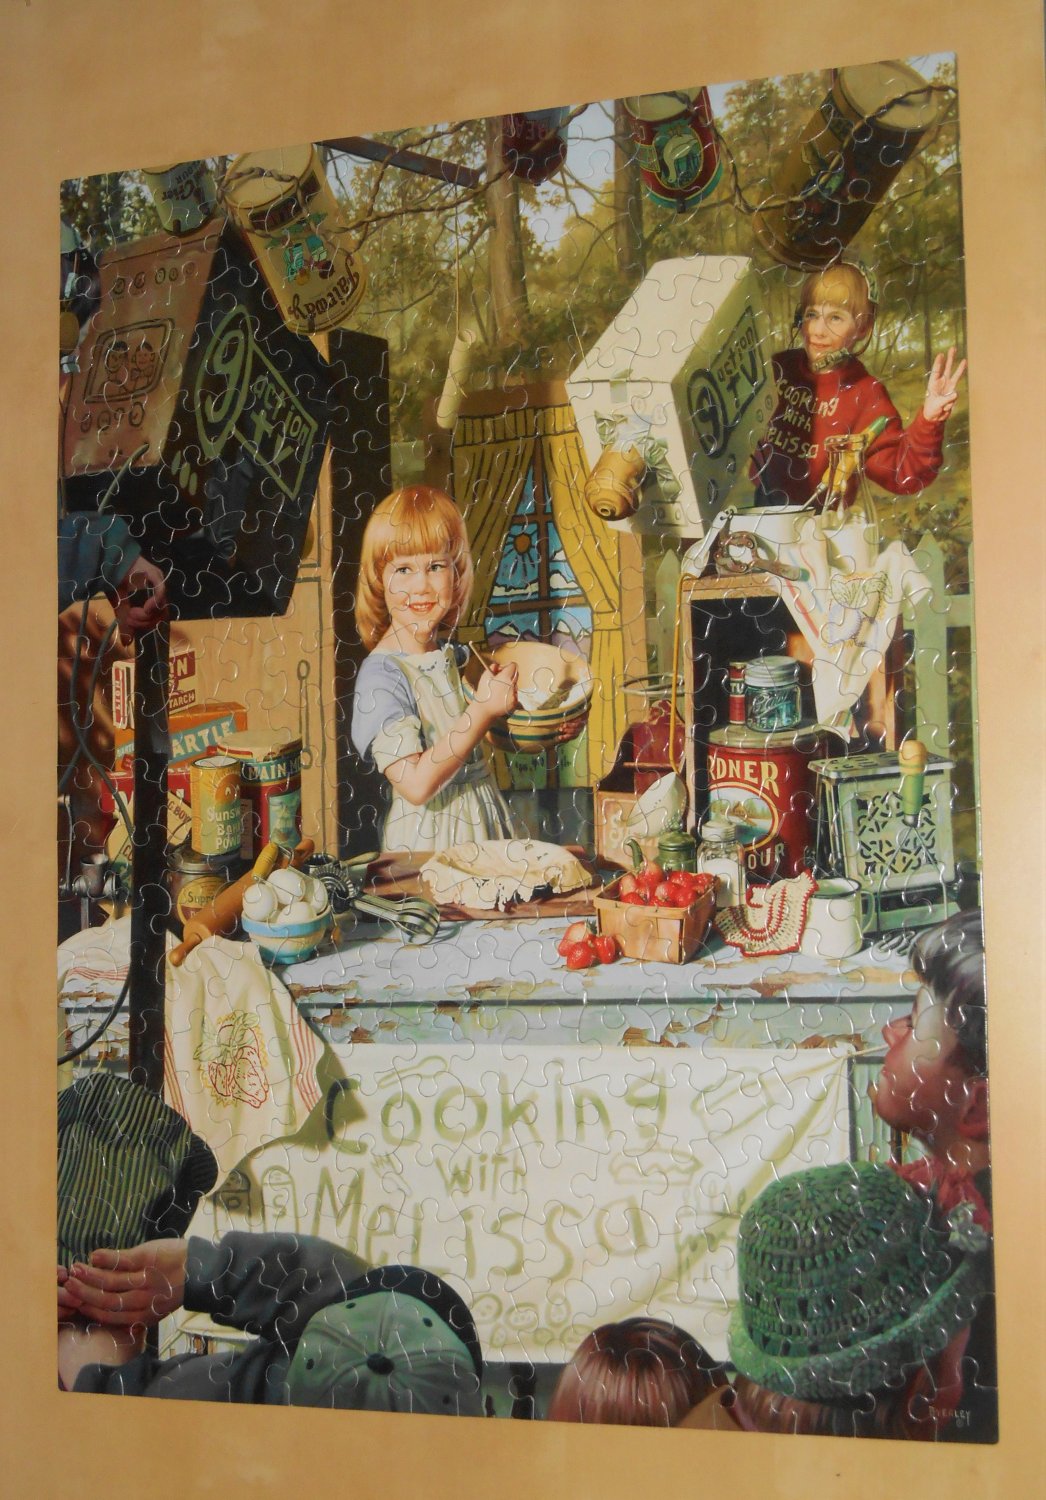 Cooking With Melissa 300 Oversized Pieces Jigsaw Puzzle Ceaco 2203-1 Hometown Memories Bob Byerley